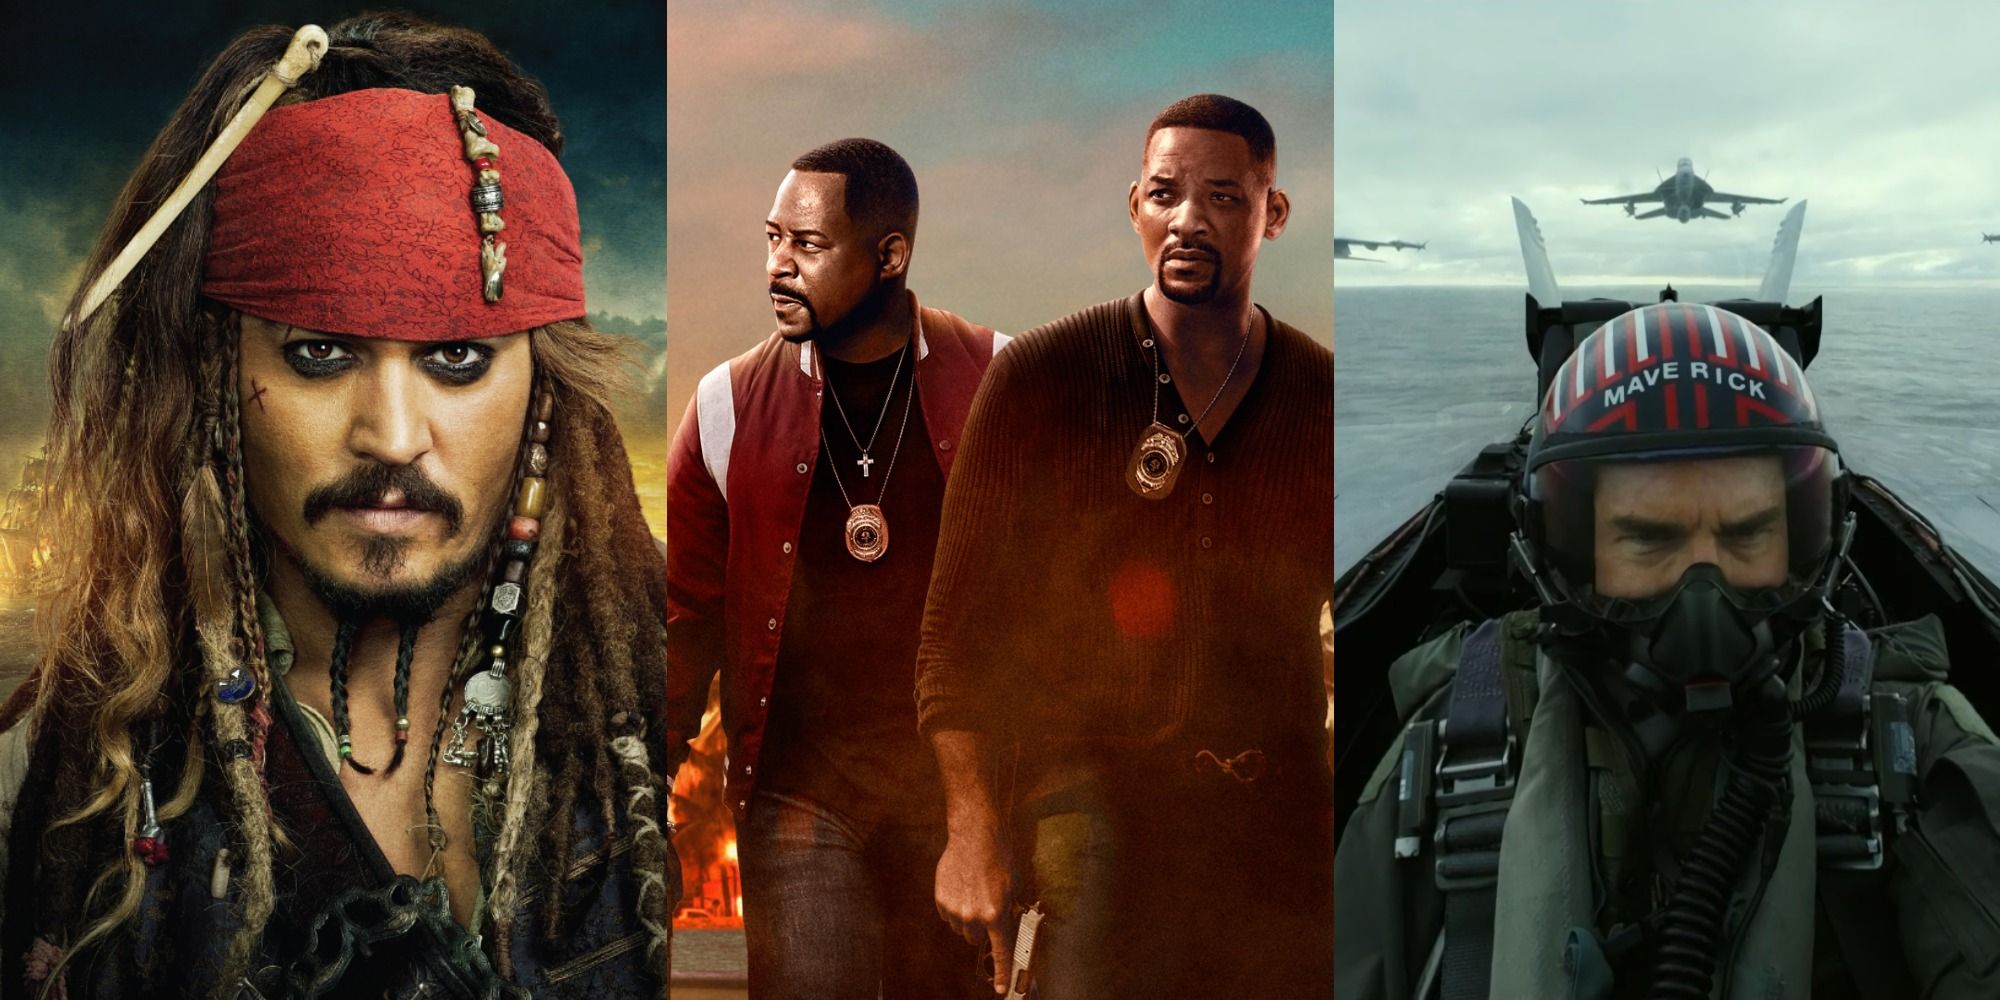 combined posters of Pirates of the Caribbean, Bad Boys 3, and Top Gun Maverick